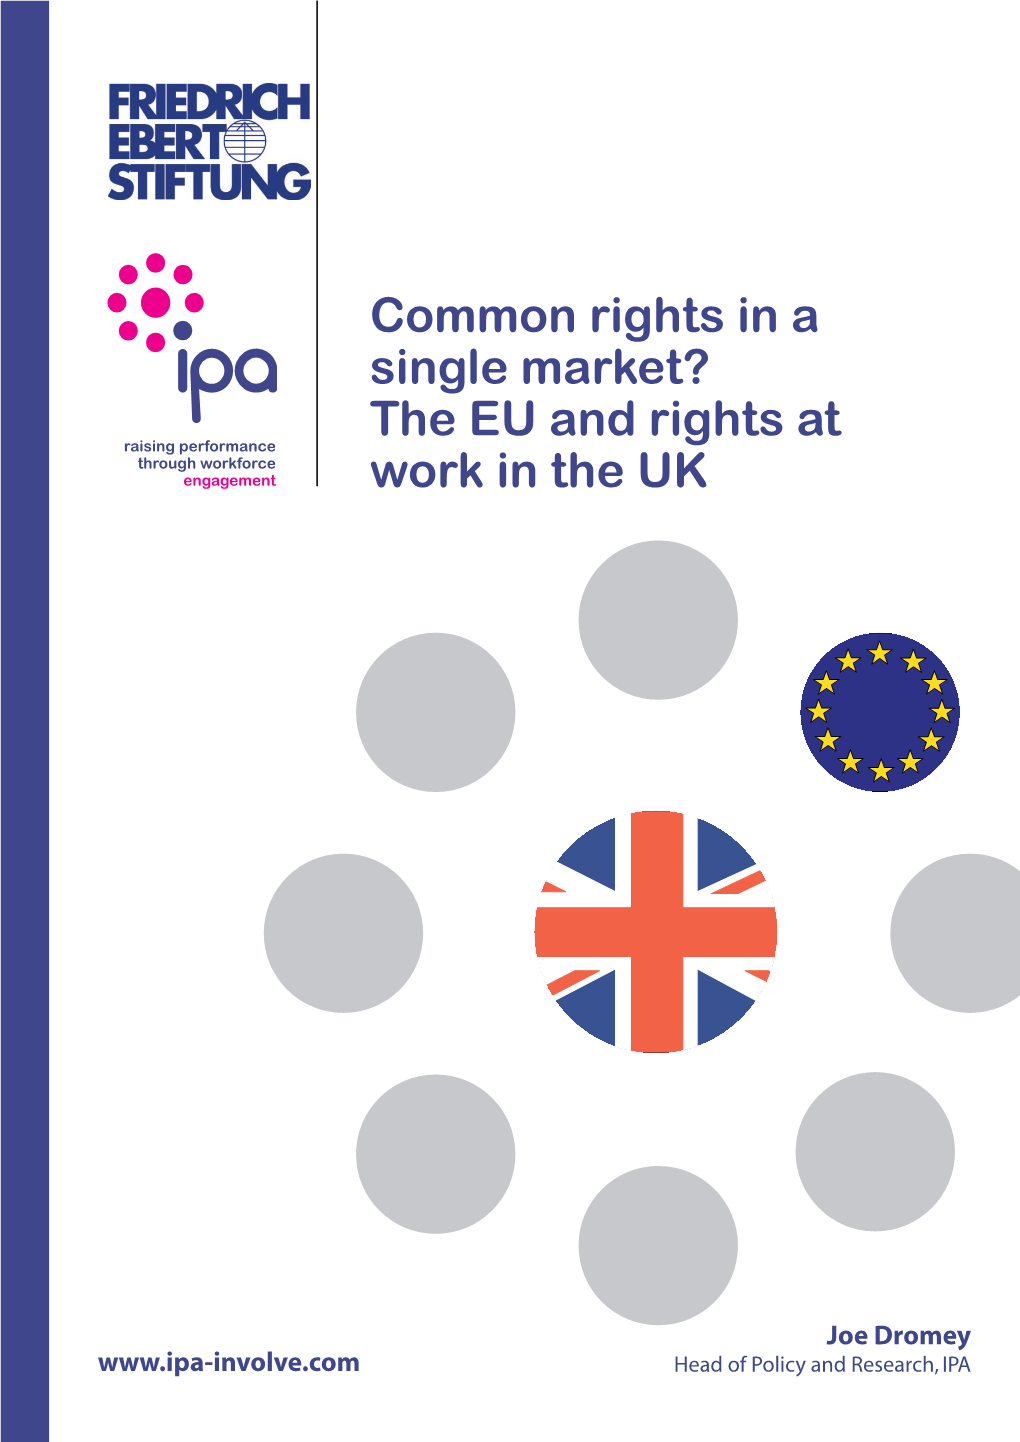 The EU and Rights at Work in the UK